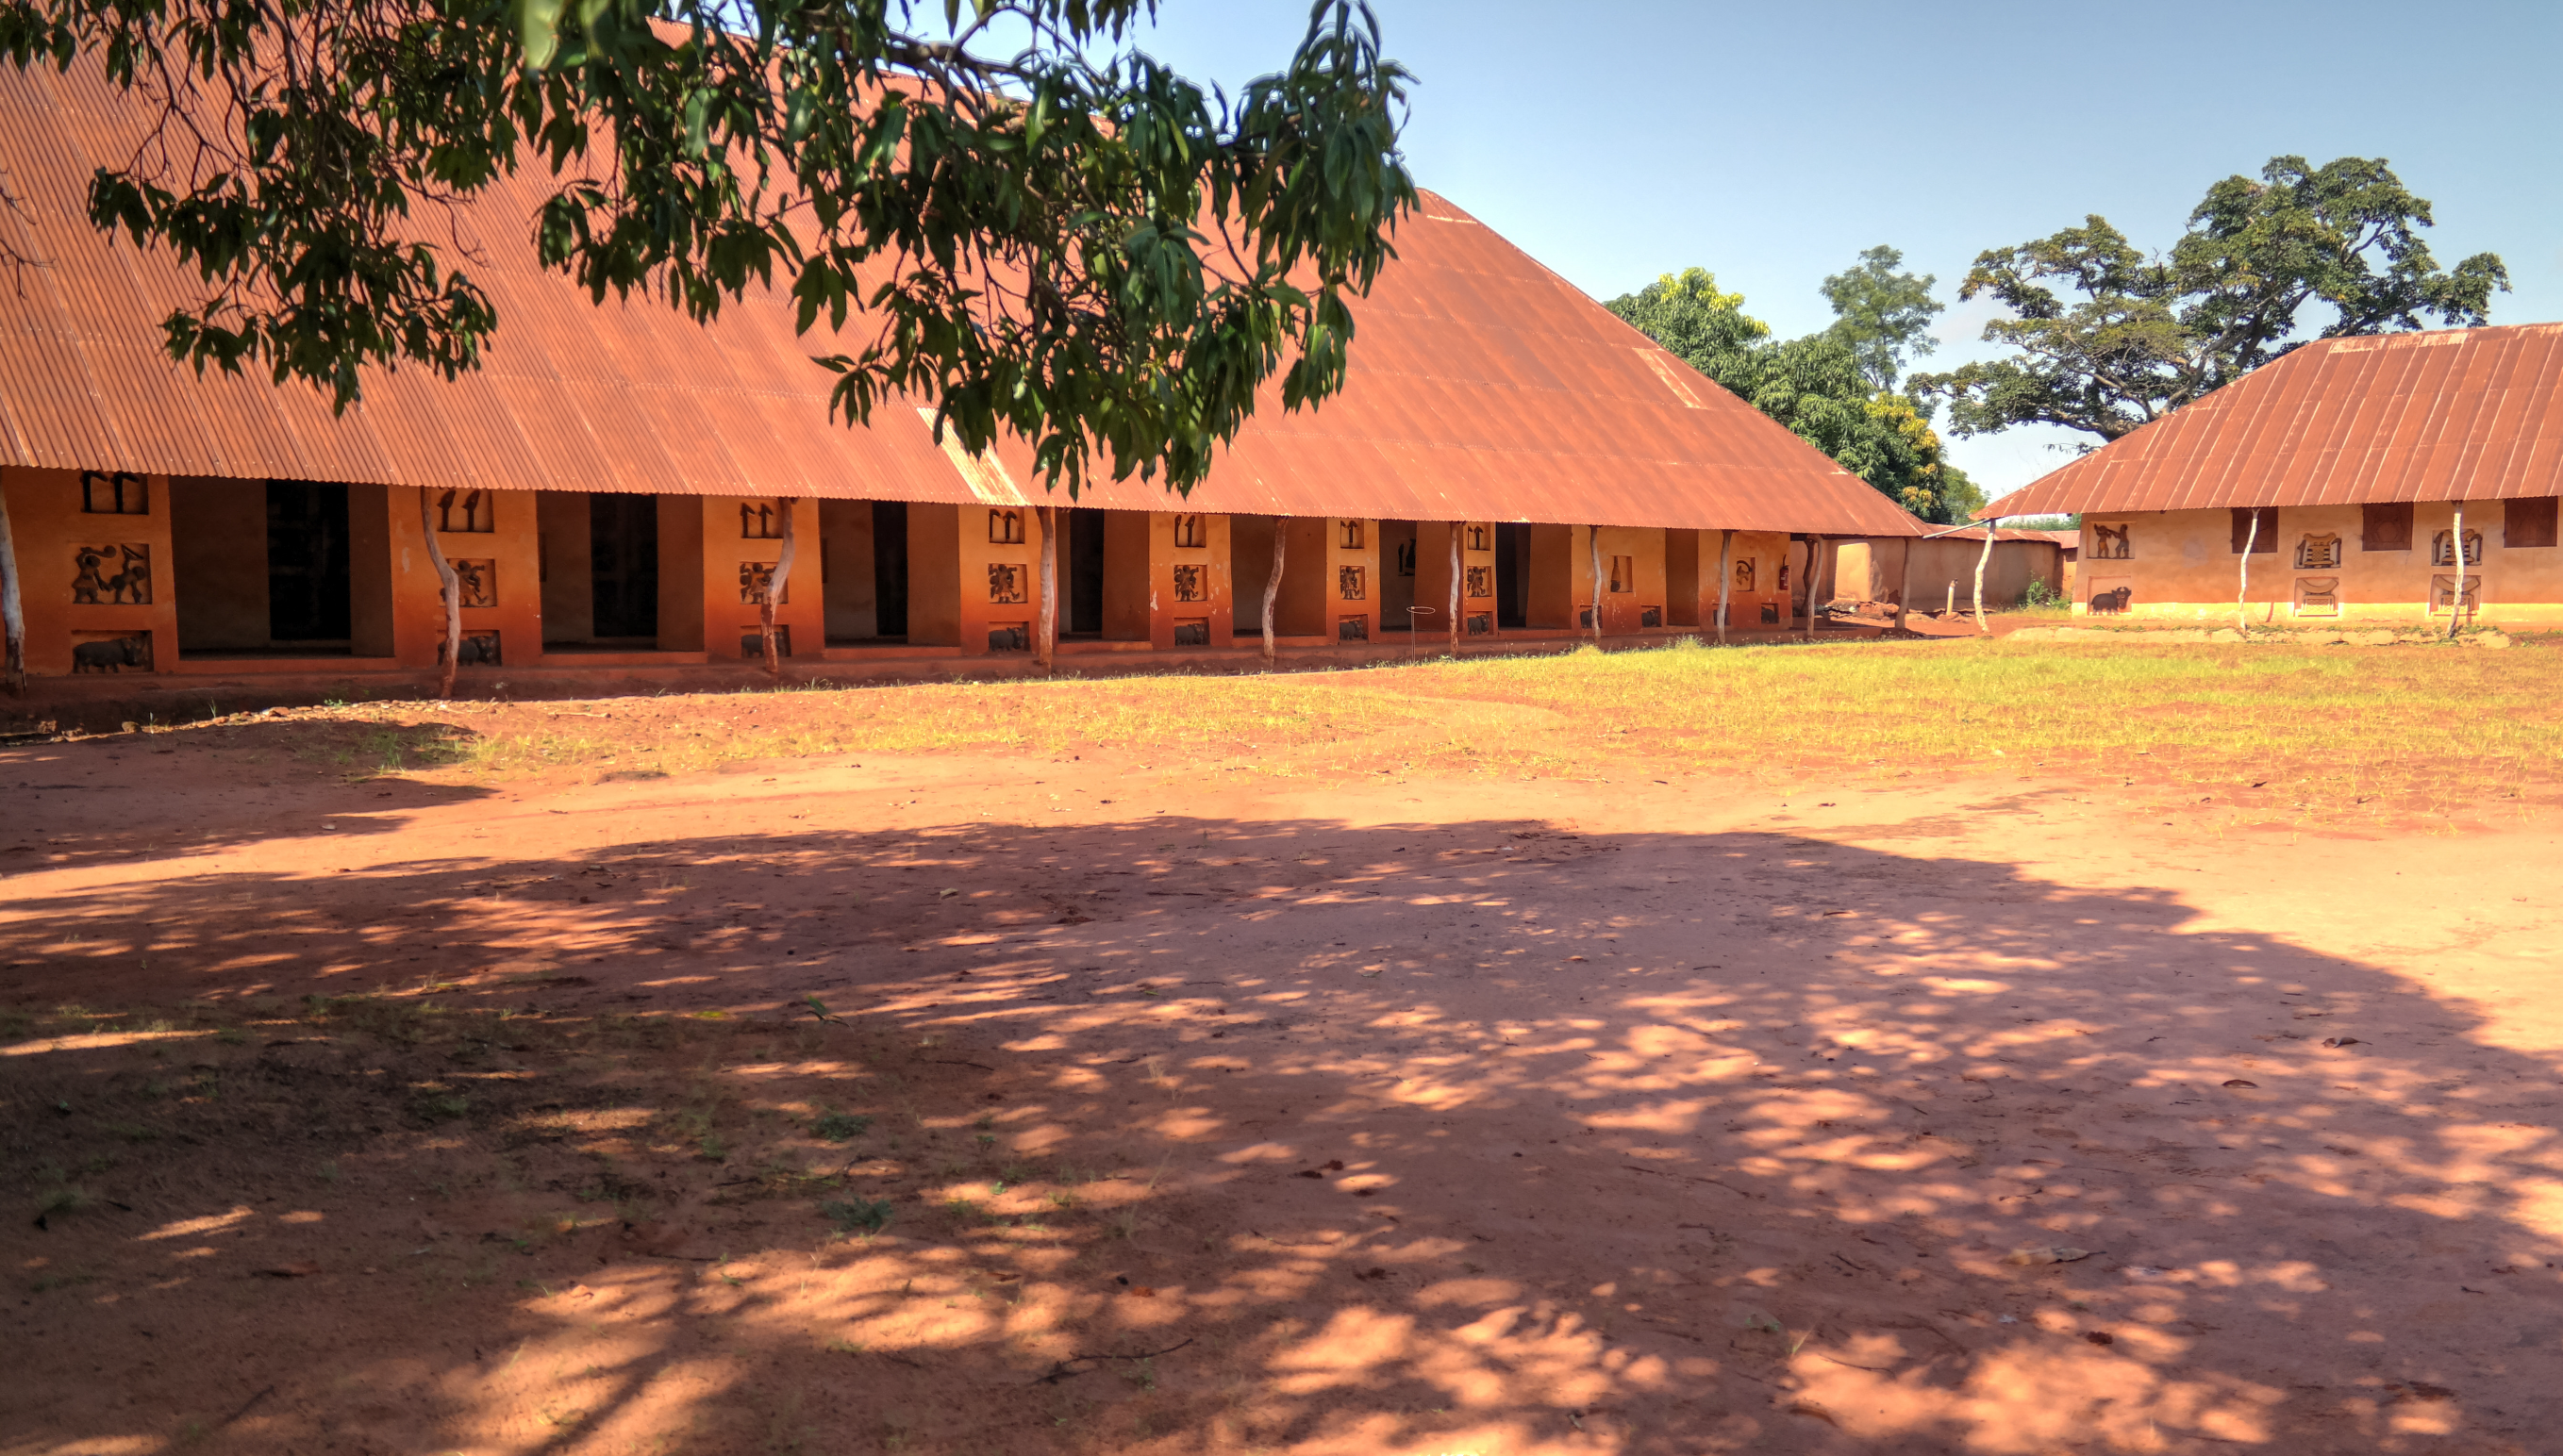 Explore the past of Abomey, the ancient capital